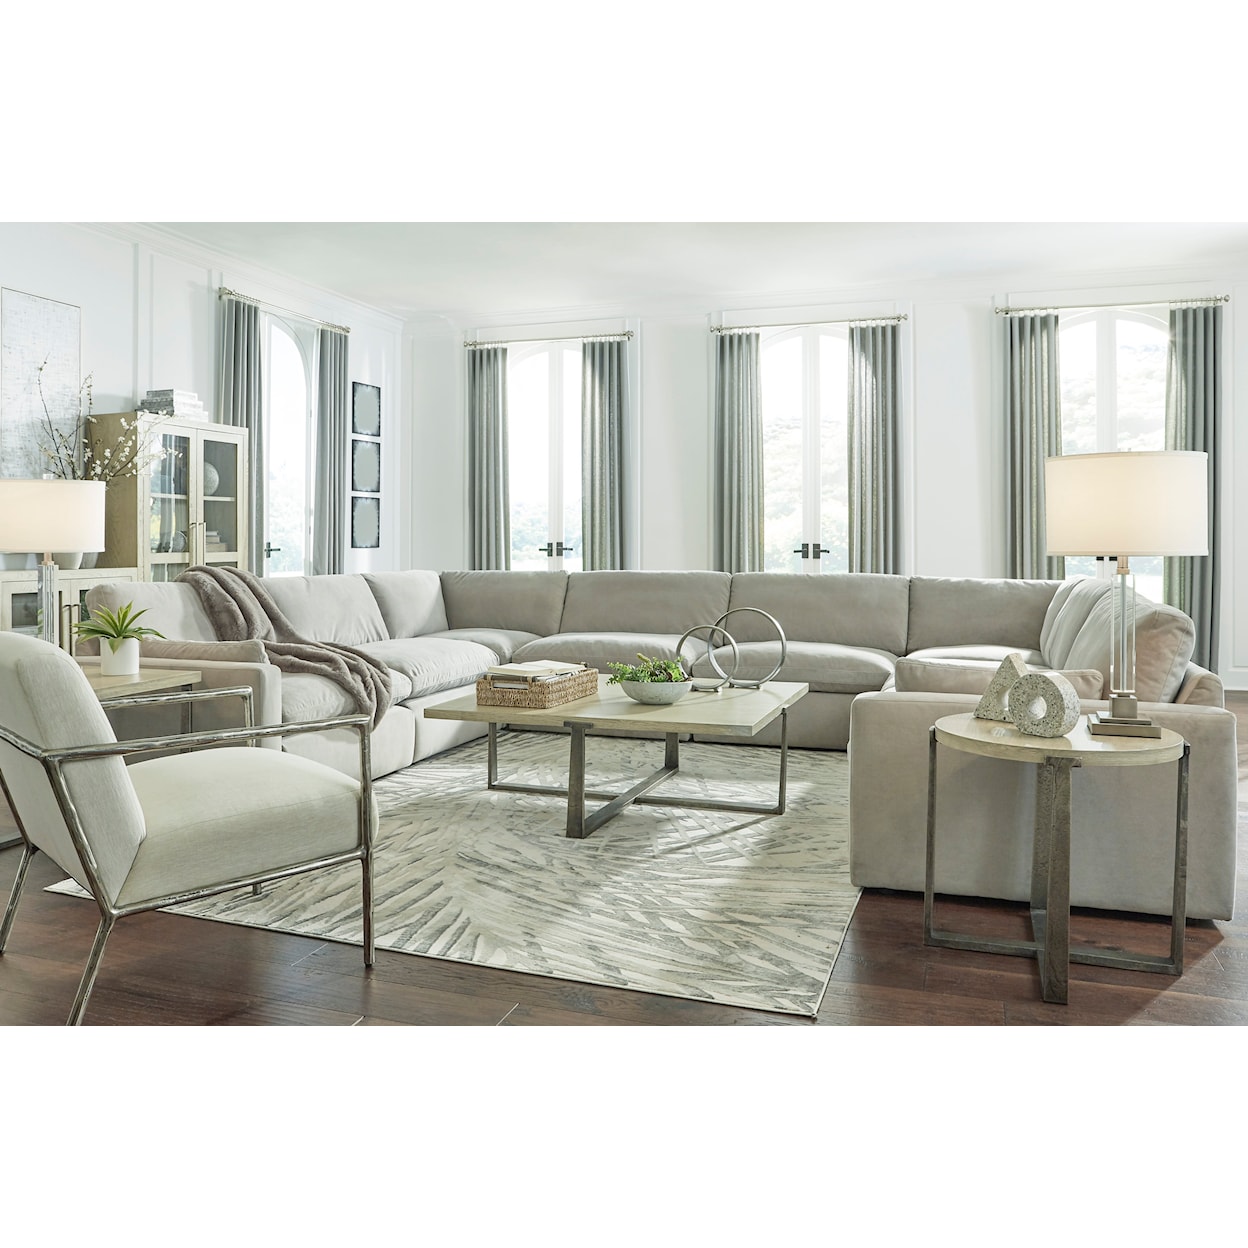 Signature Design by Ashley Sophie 8-Piece Sectional